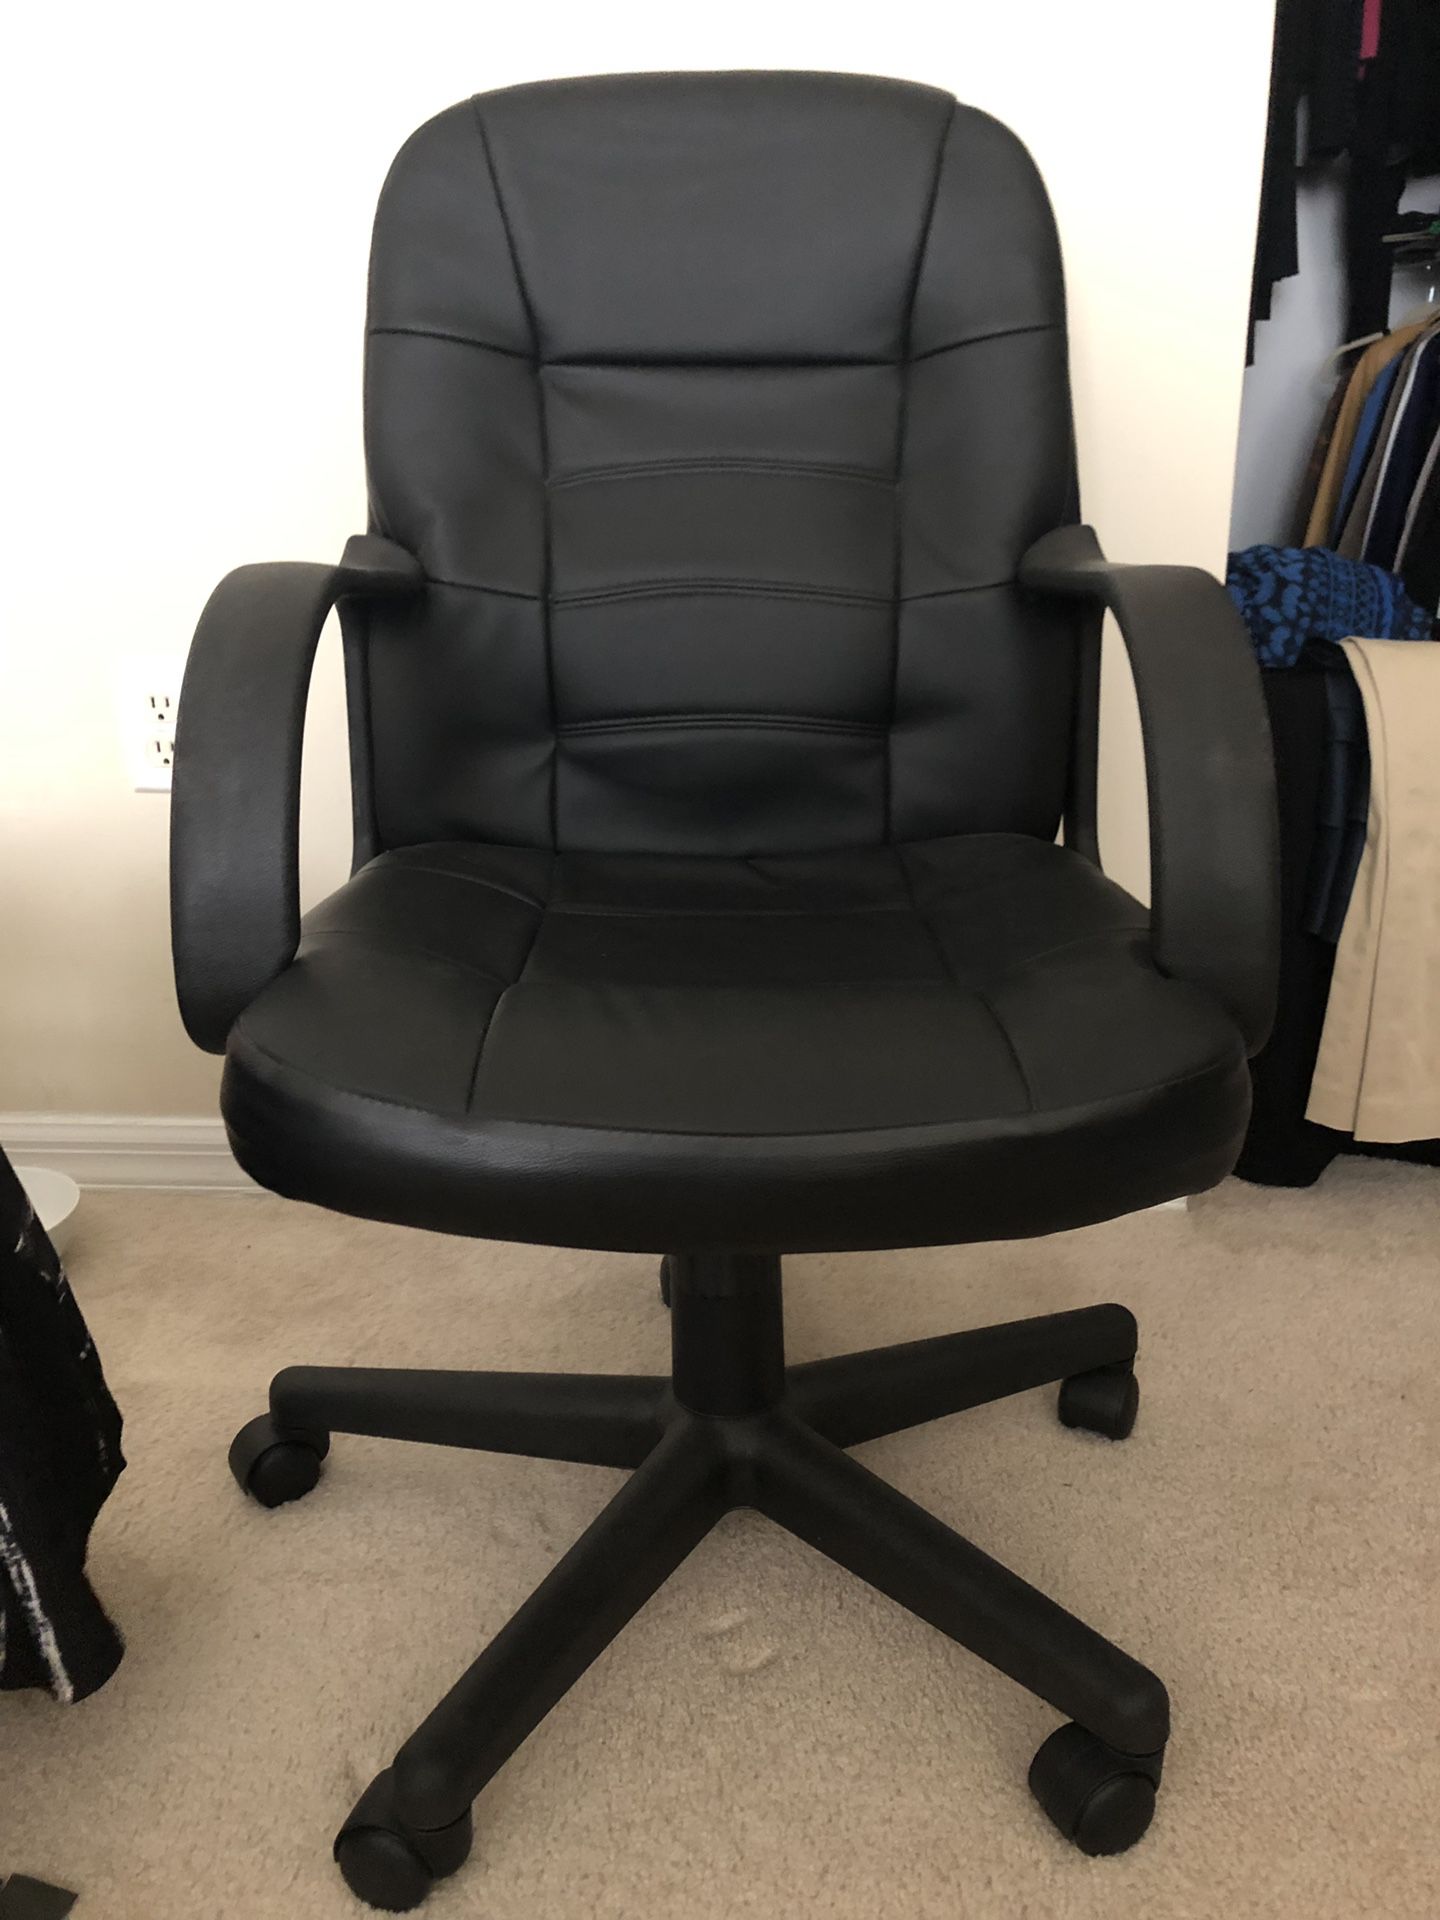 Black Leather Office Chair Like New